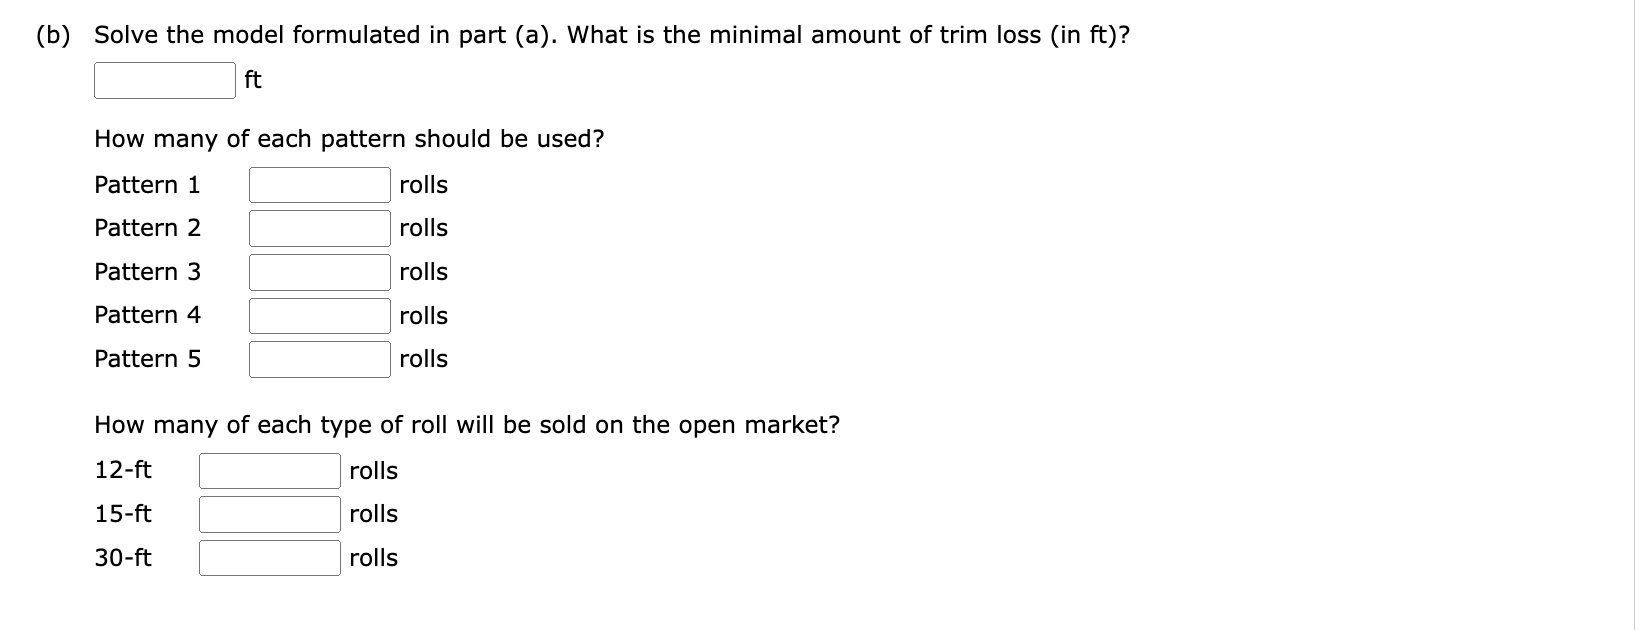 (b) Solve the model formulated in part (a). What is the minimal amount of trim loss (in \( \mathrm{ft} \) )?
\( \mathrm{ft} \